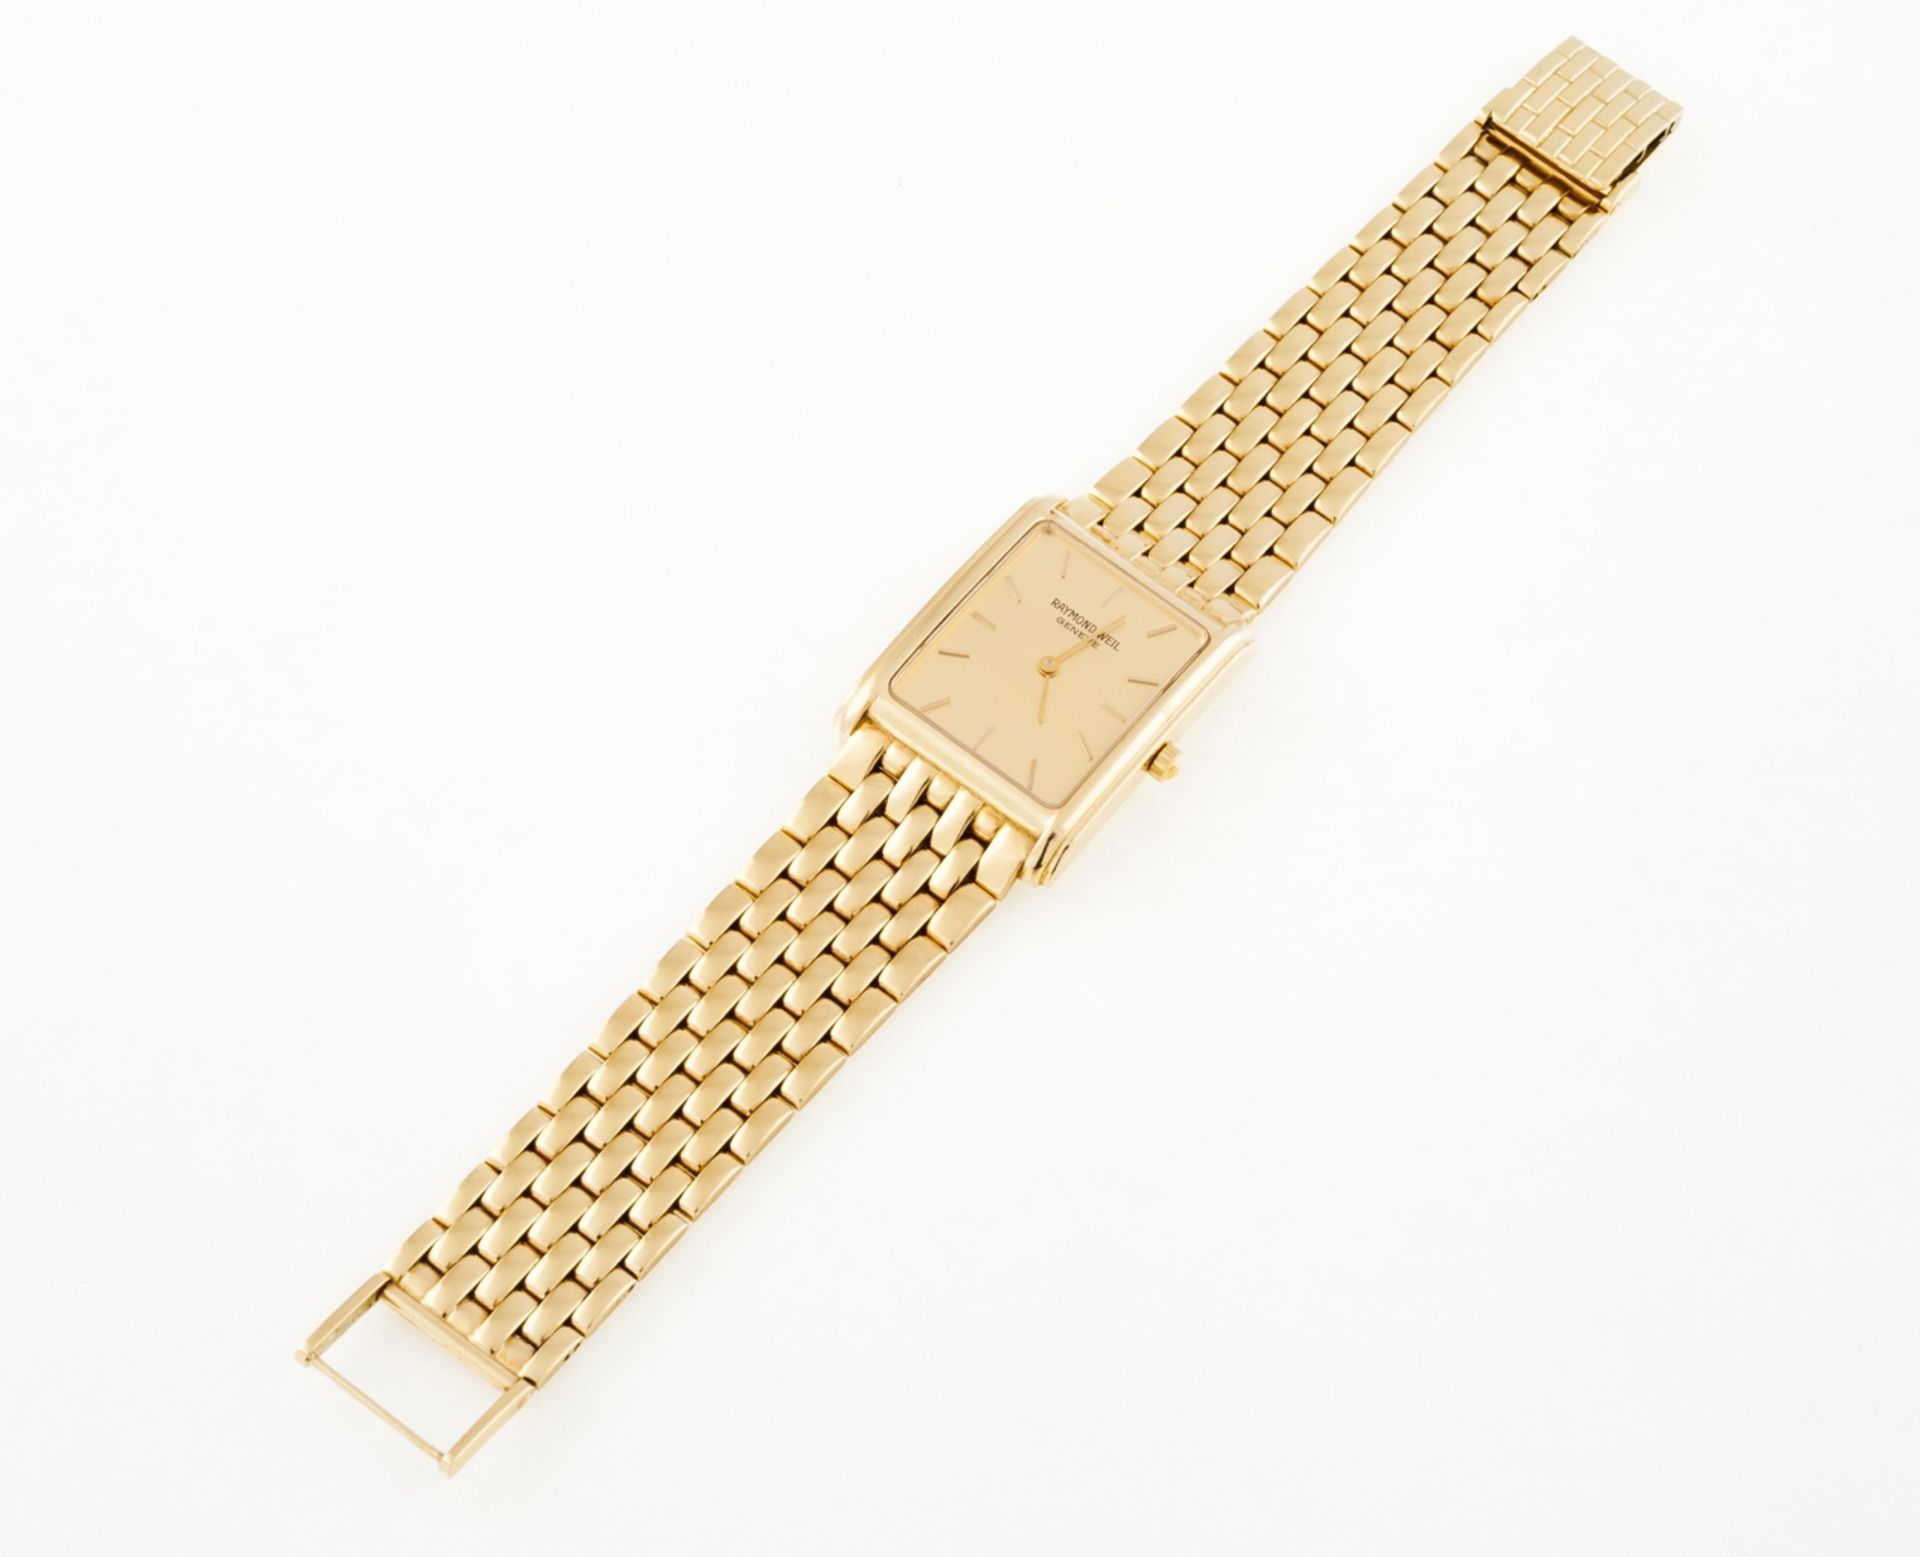 A gold wristwatch, RAYMOND WEIL  Gold case and bracelet  Rectangular case, marked and numbered